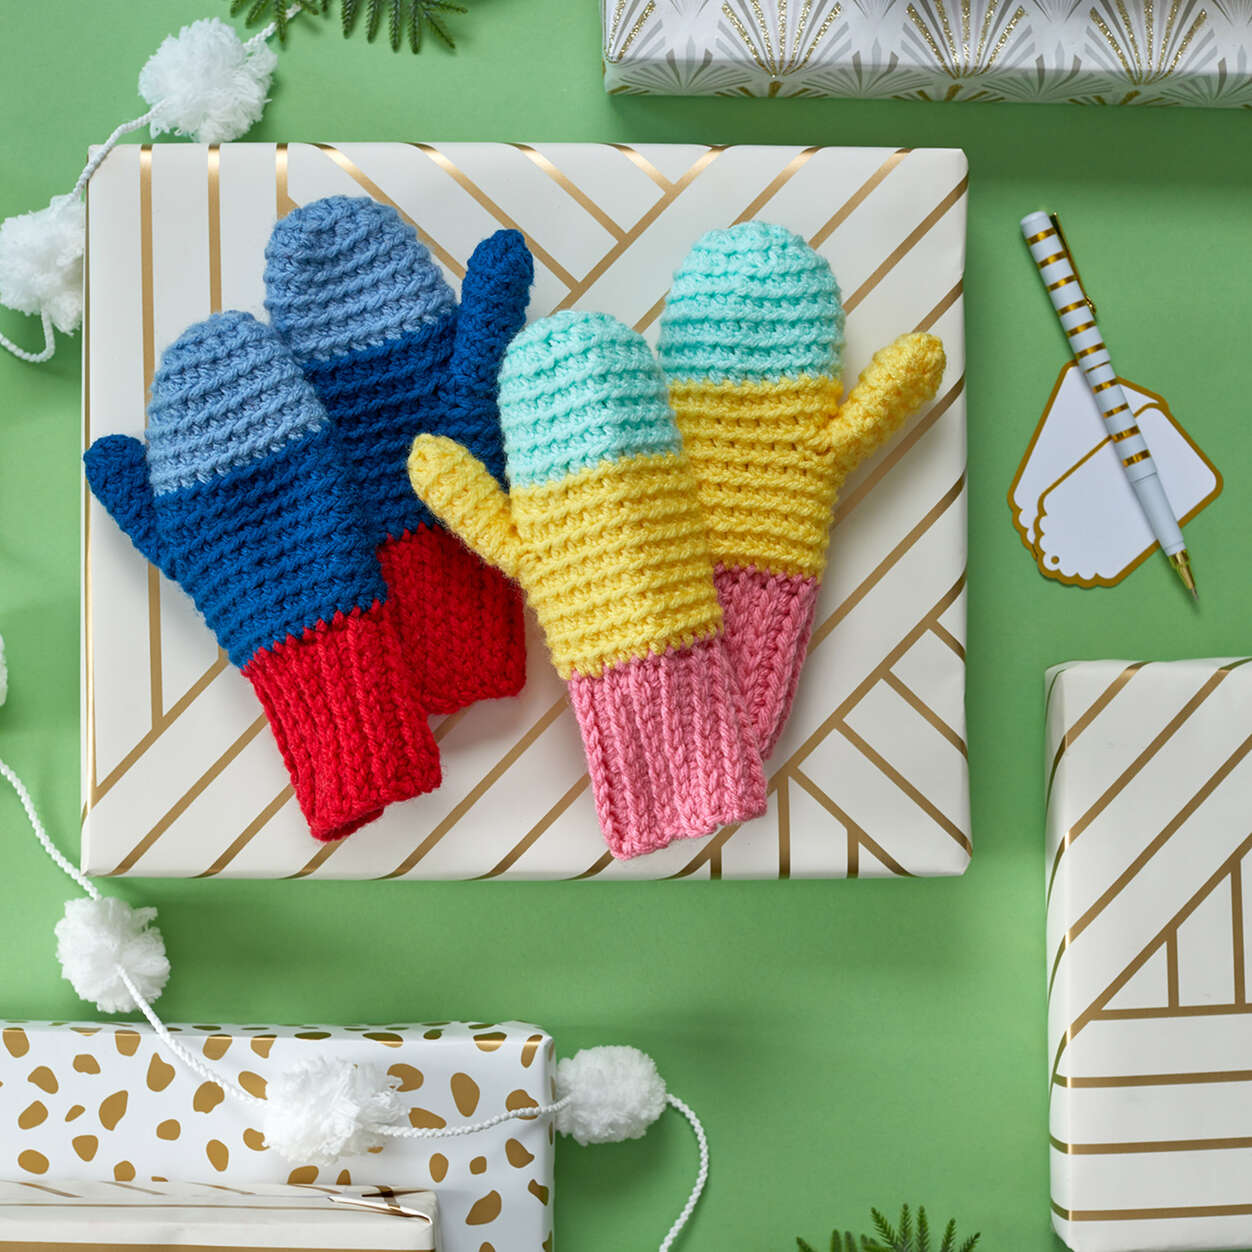 Snowday Crochet Mitten Pattern shown in to sets of different colors displayed on wrapped presents - Marly Bird